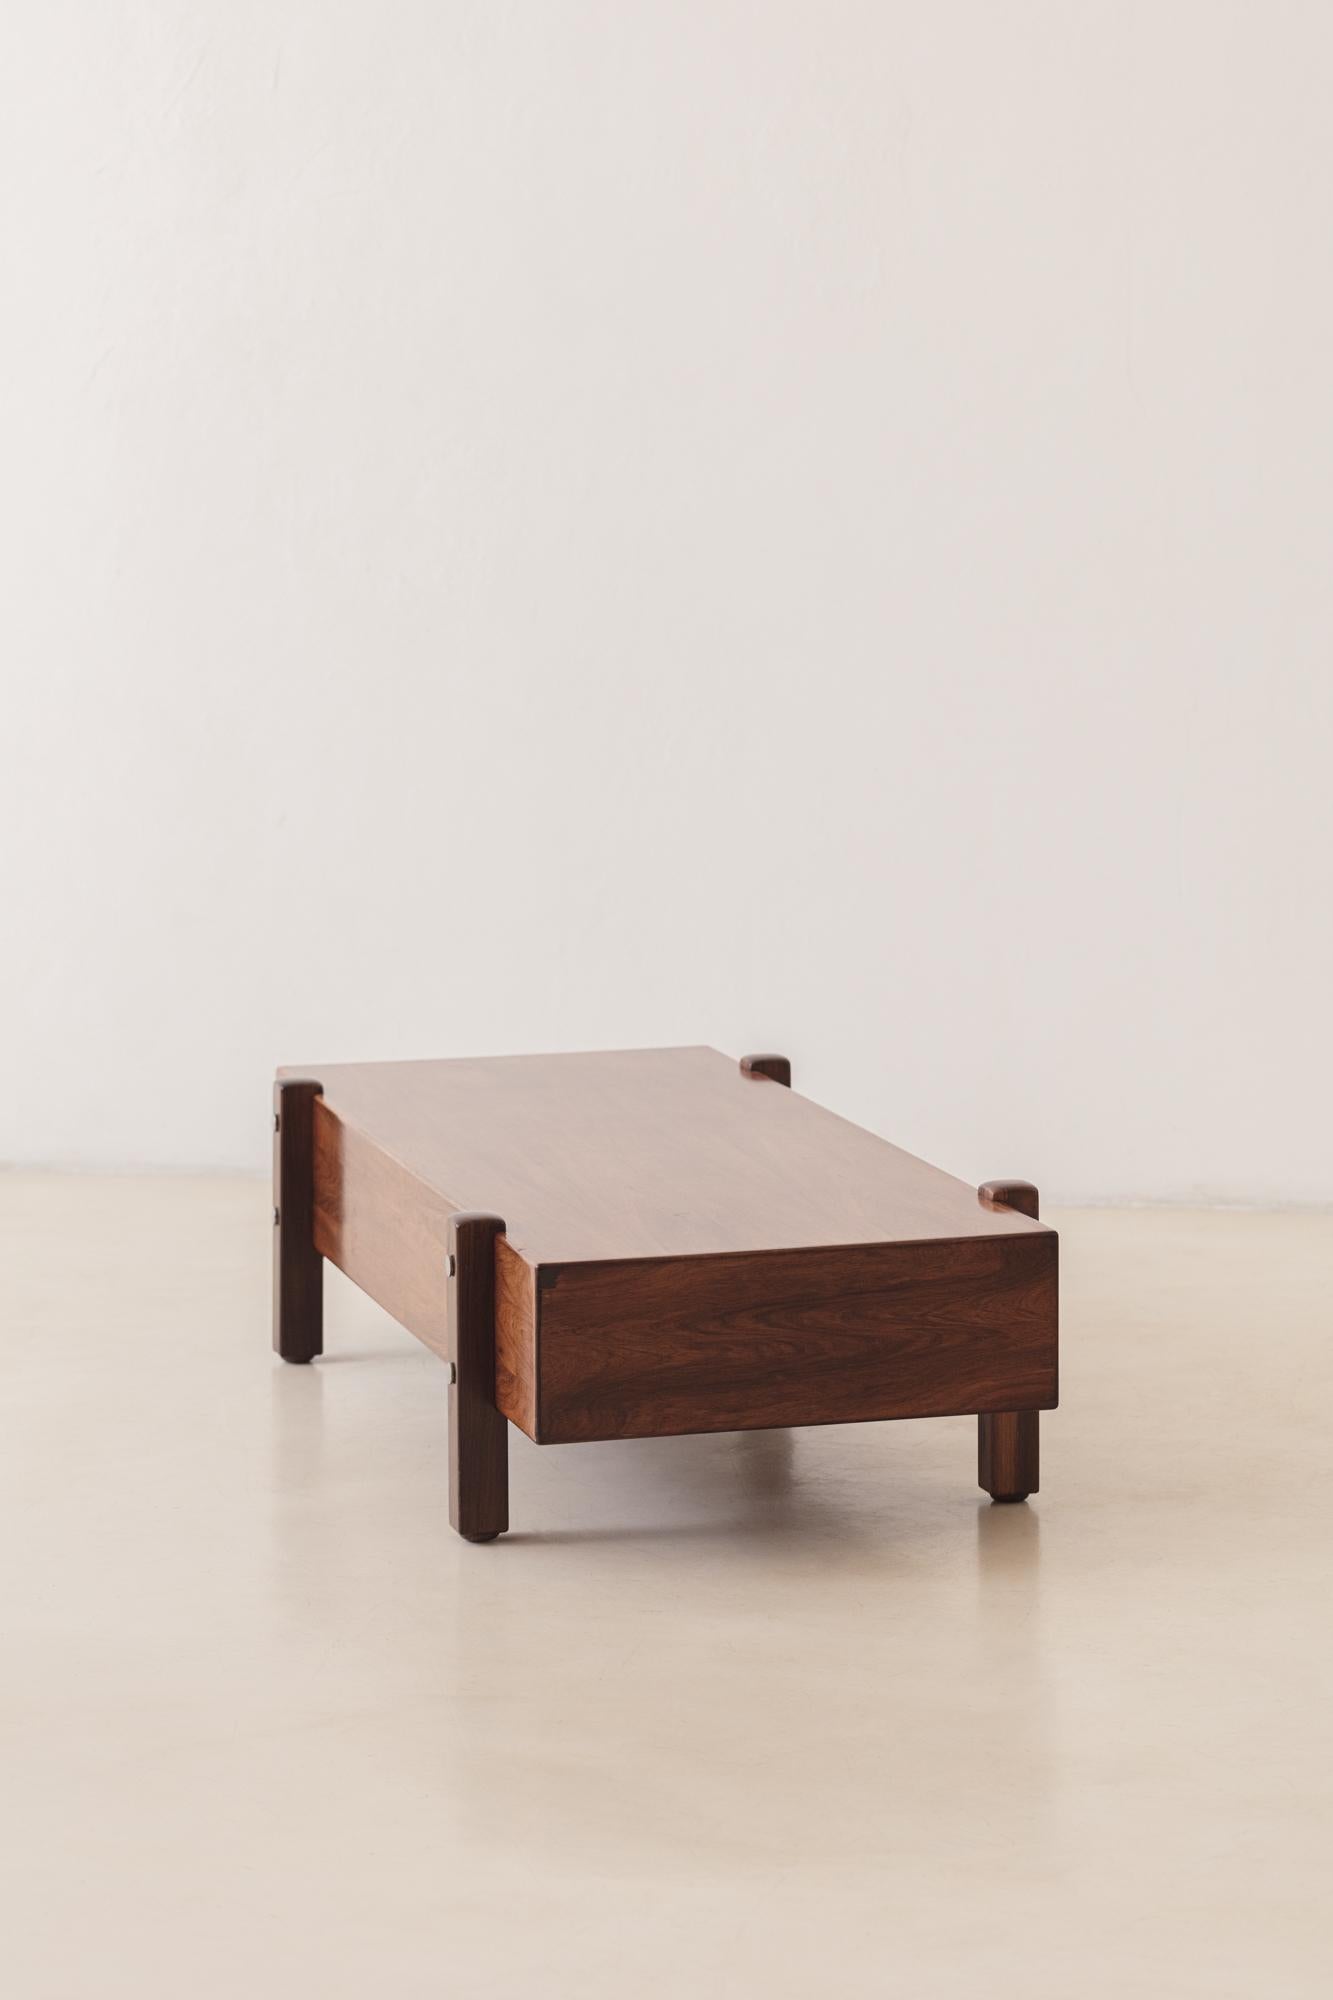 Vintage Eleh Bench by Sergio Rodrigues, Rosewood, 1960s, Brazilian Midcentury In Good Condition For Sale In New York, NY